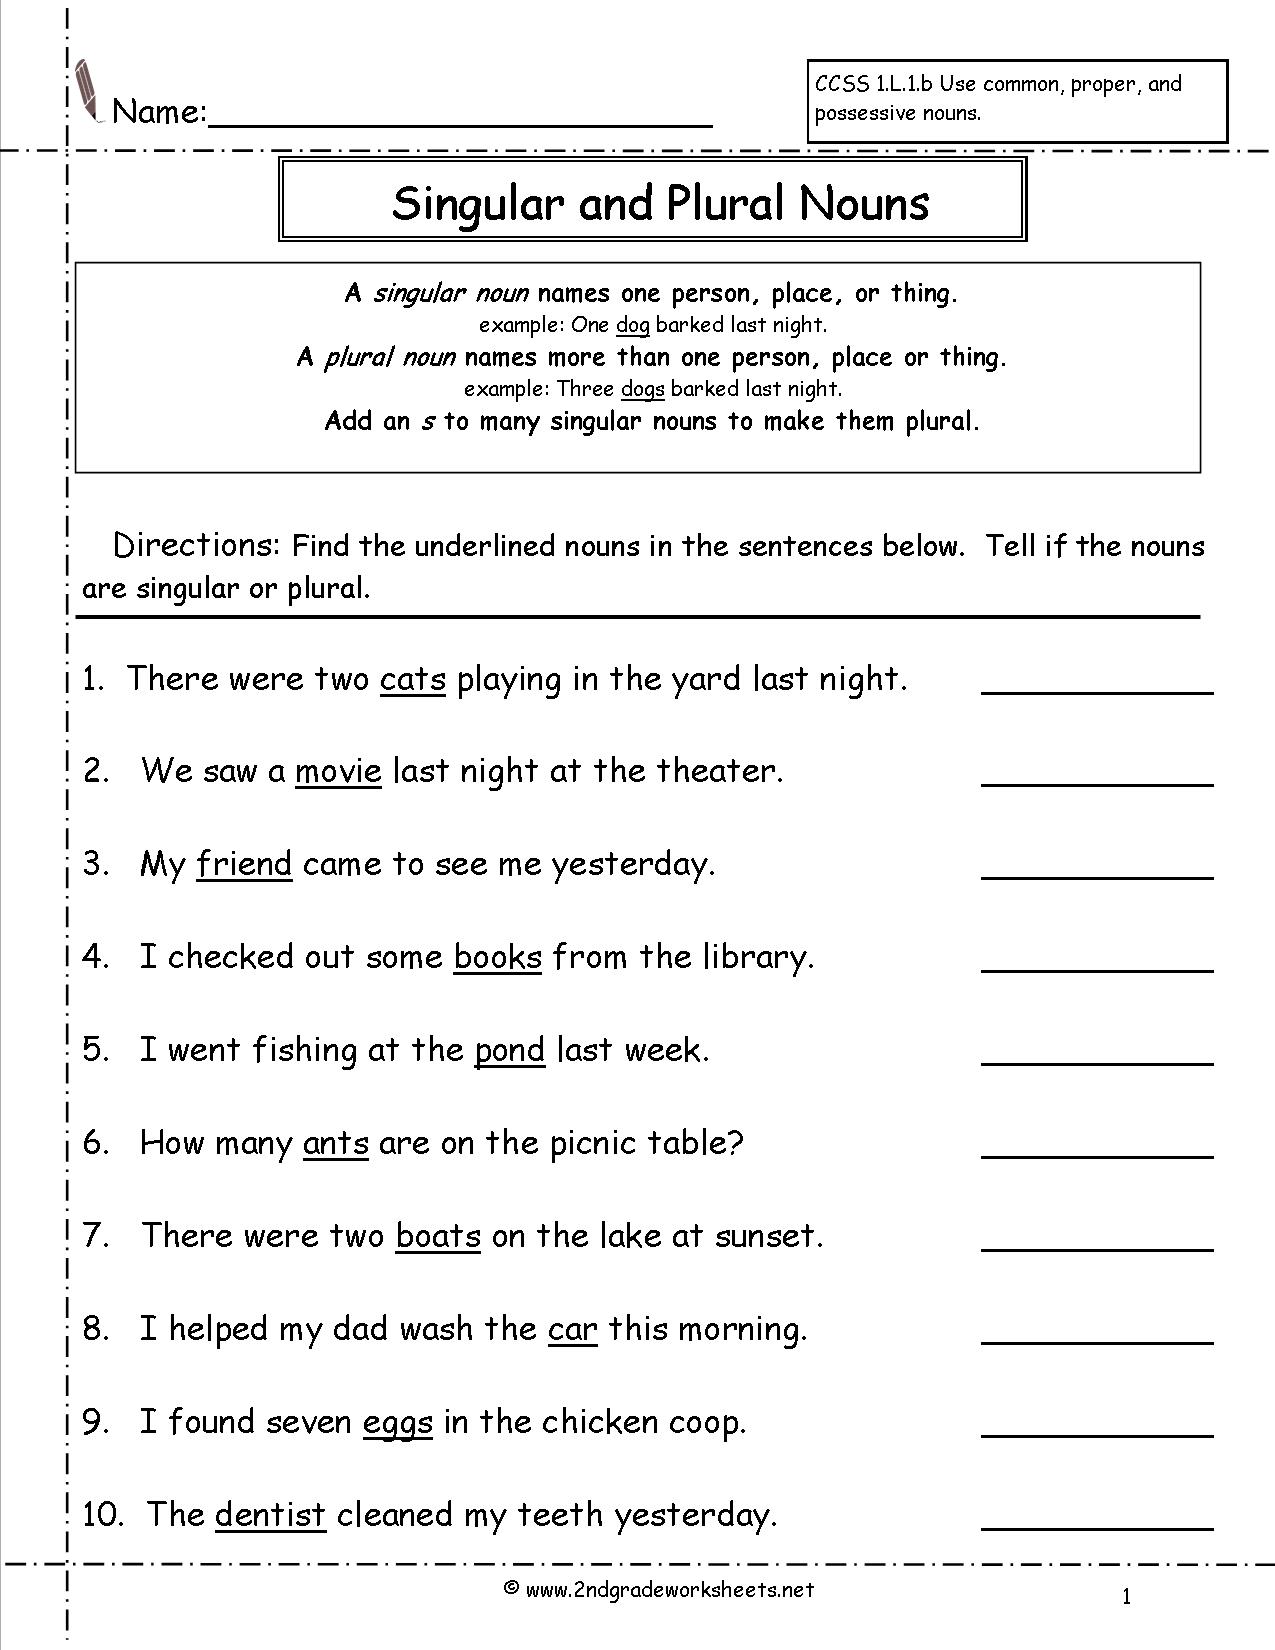 singular-plural-english-esl-worksheets-for-distance-learning-and-physical-classrooms-in-2020